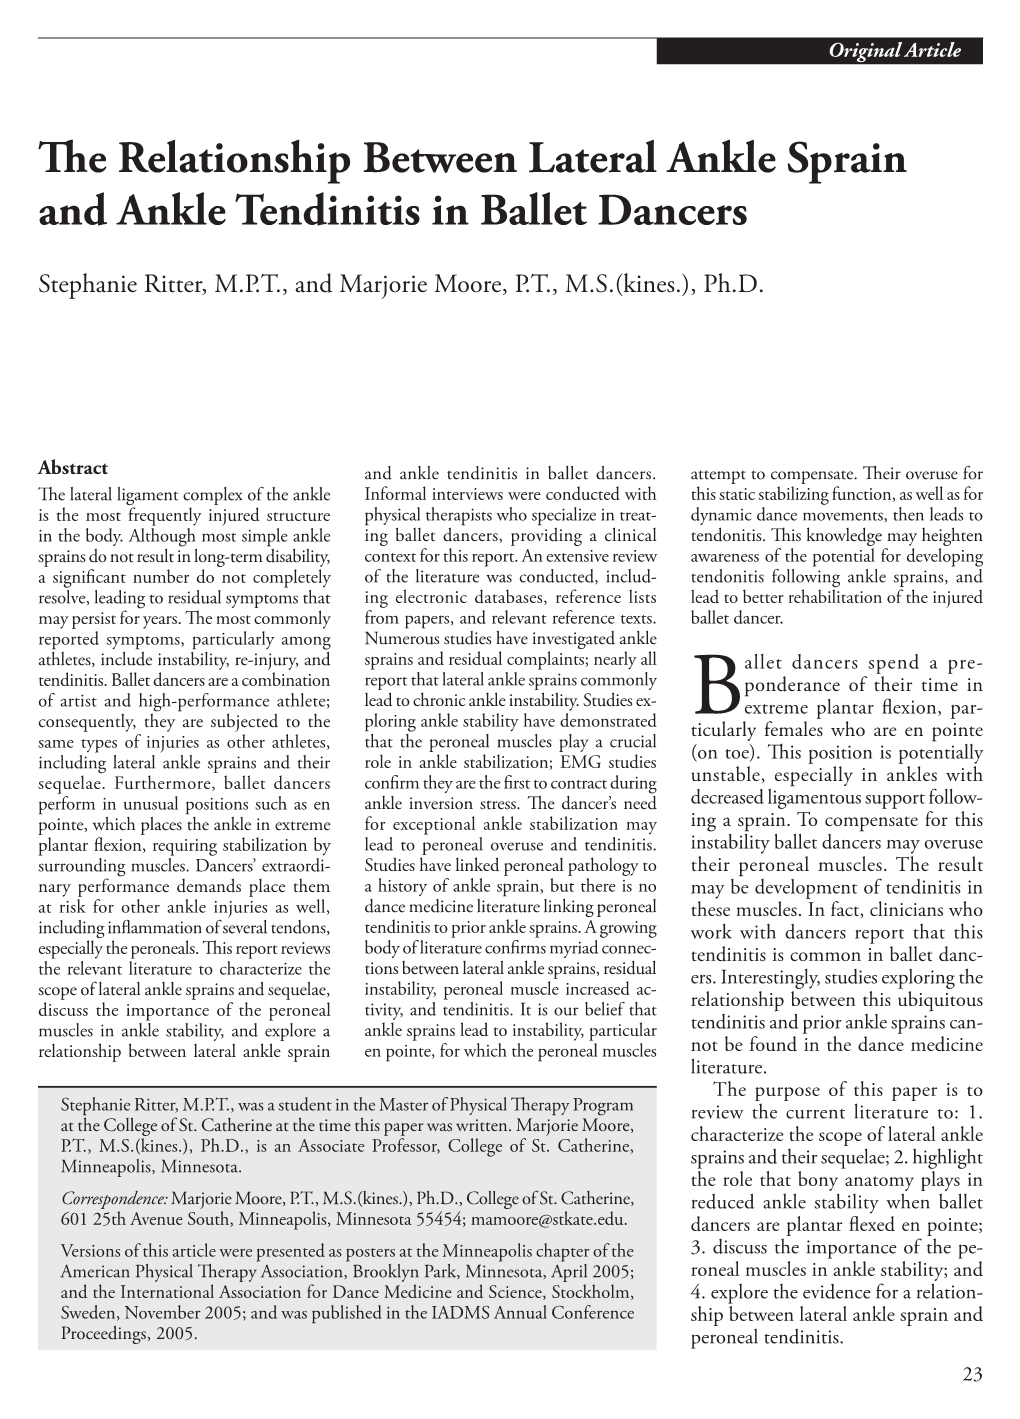 The Relationship Between Lateral Ankle Sprain and Ankle Tendinitis in Ballet Dancers